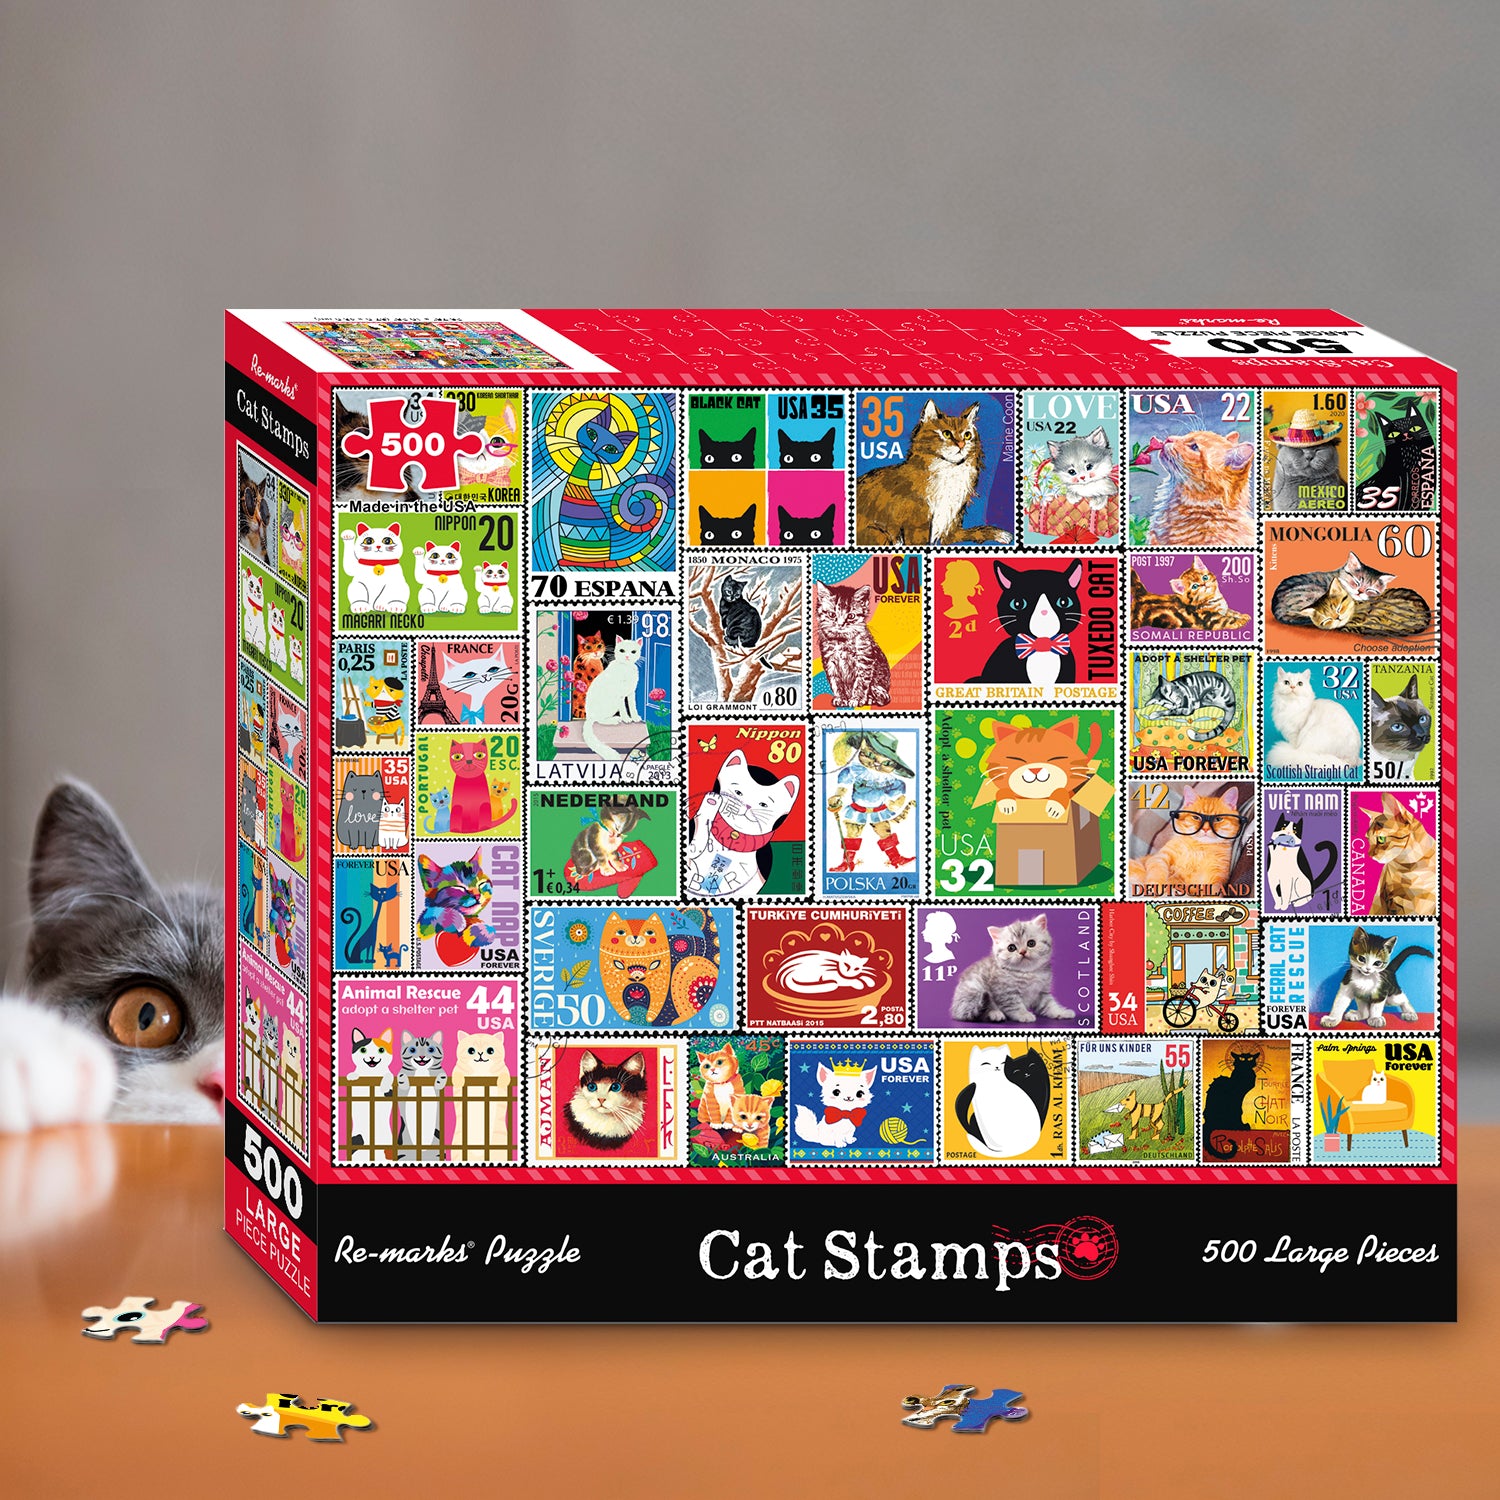 500 Piece Puzzle Cat Stamps by Re-marks, Inc.